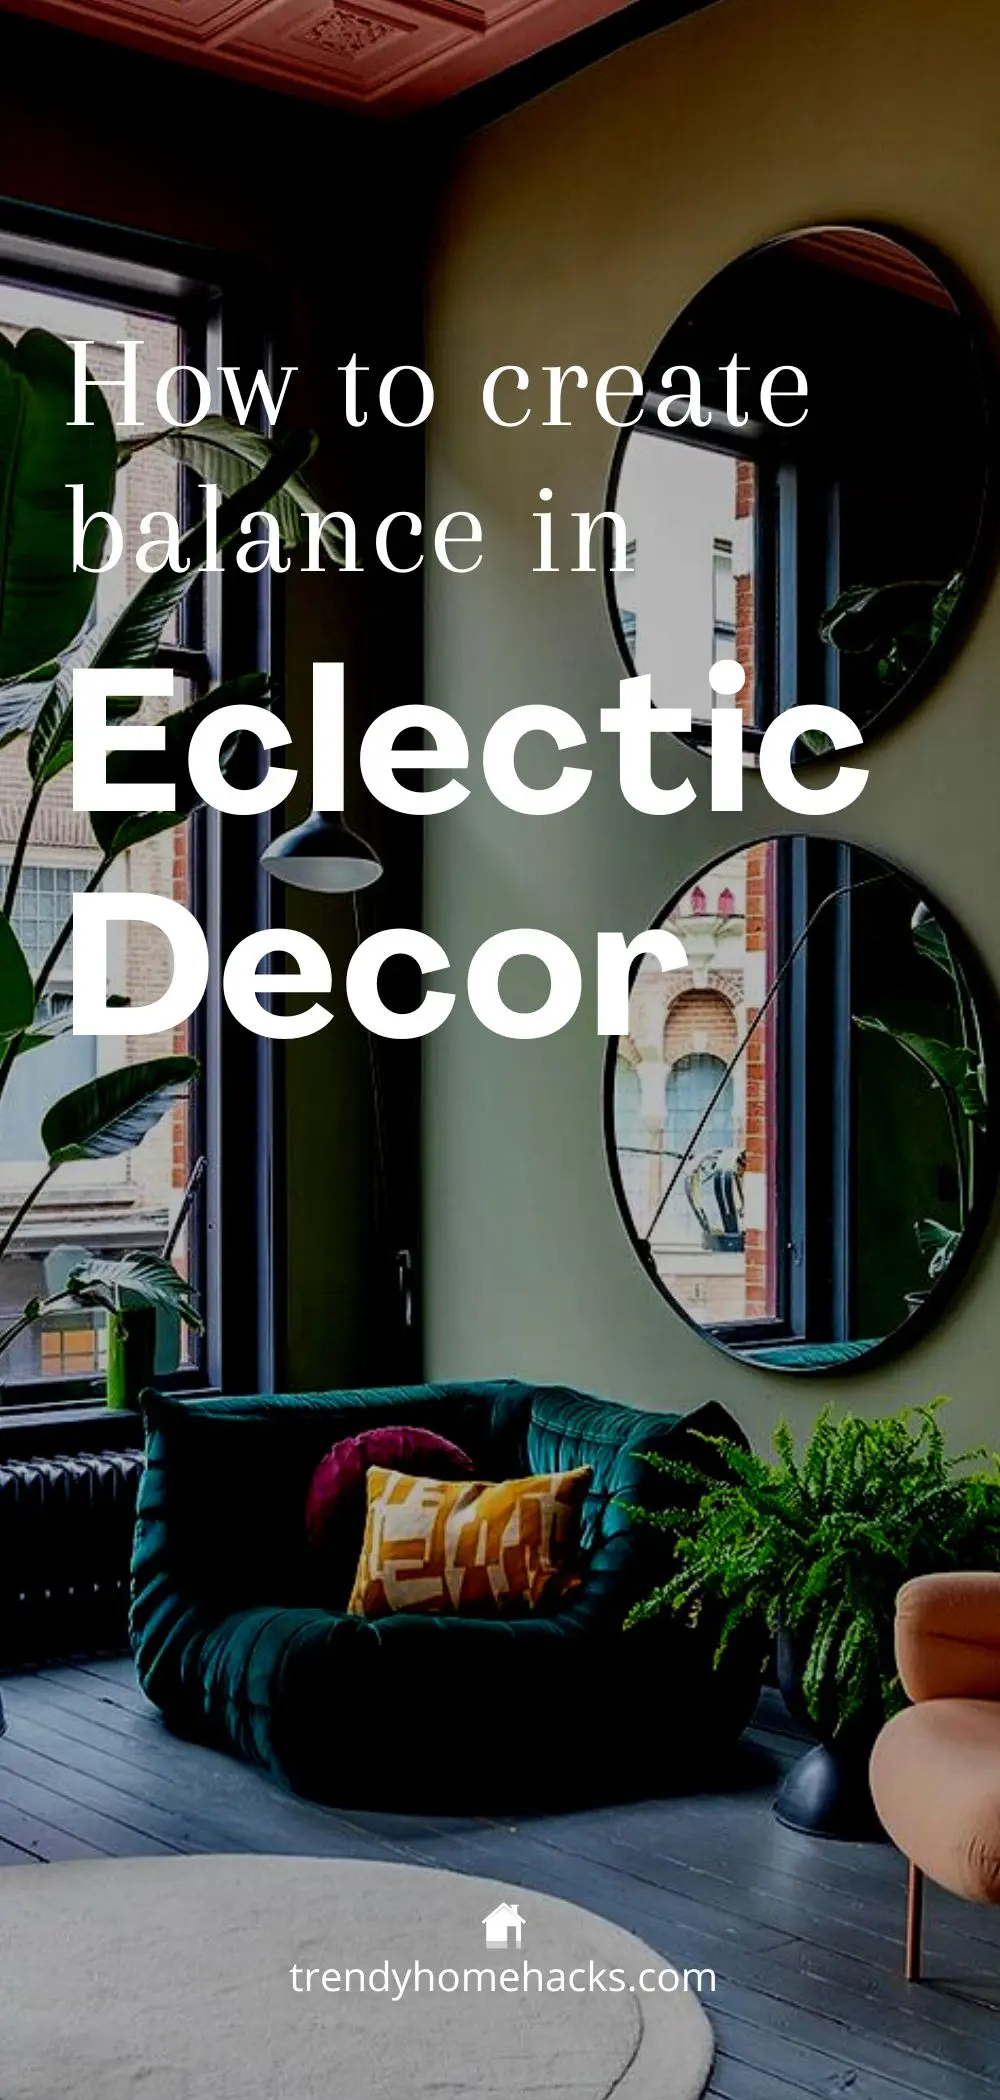 an image with a darker background and text overly "How to create balance in Eclectic Decor" to pin to your favorite Pinterest board for future reference.